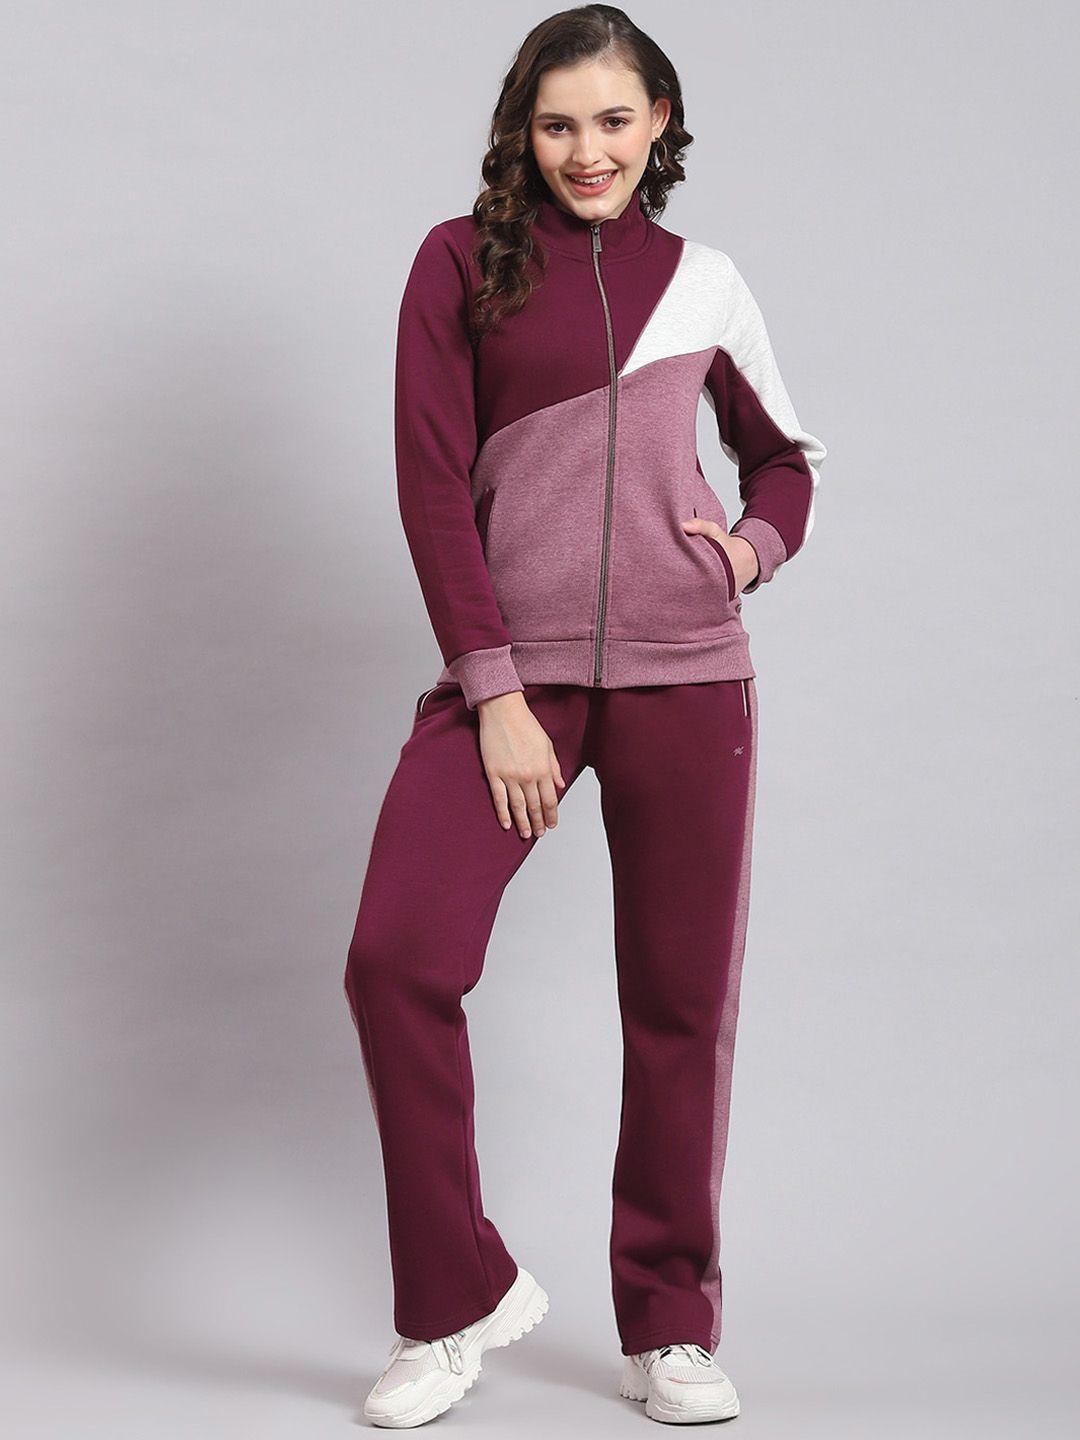 monte-carlo-colourblocked-mid-rise-sweatshirt-with-track-pants